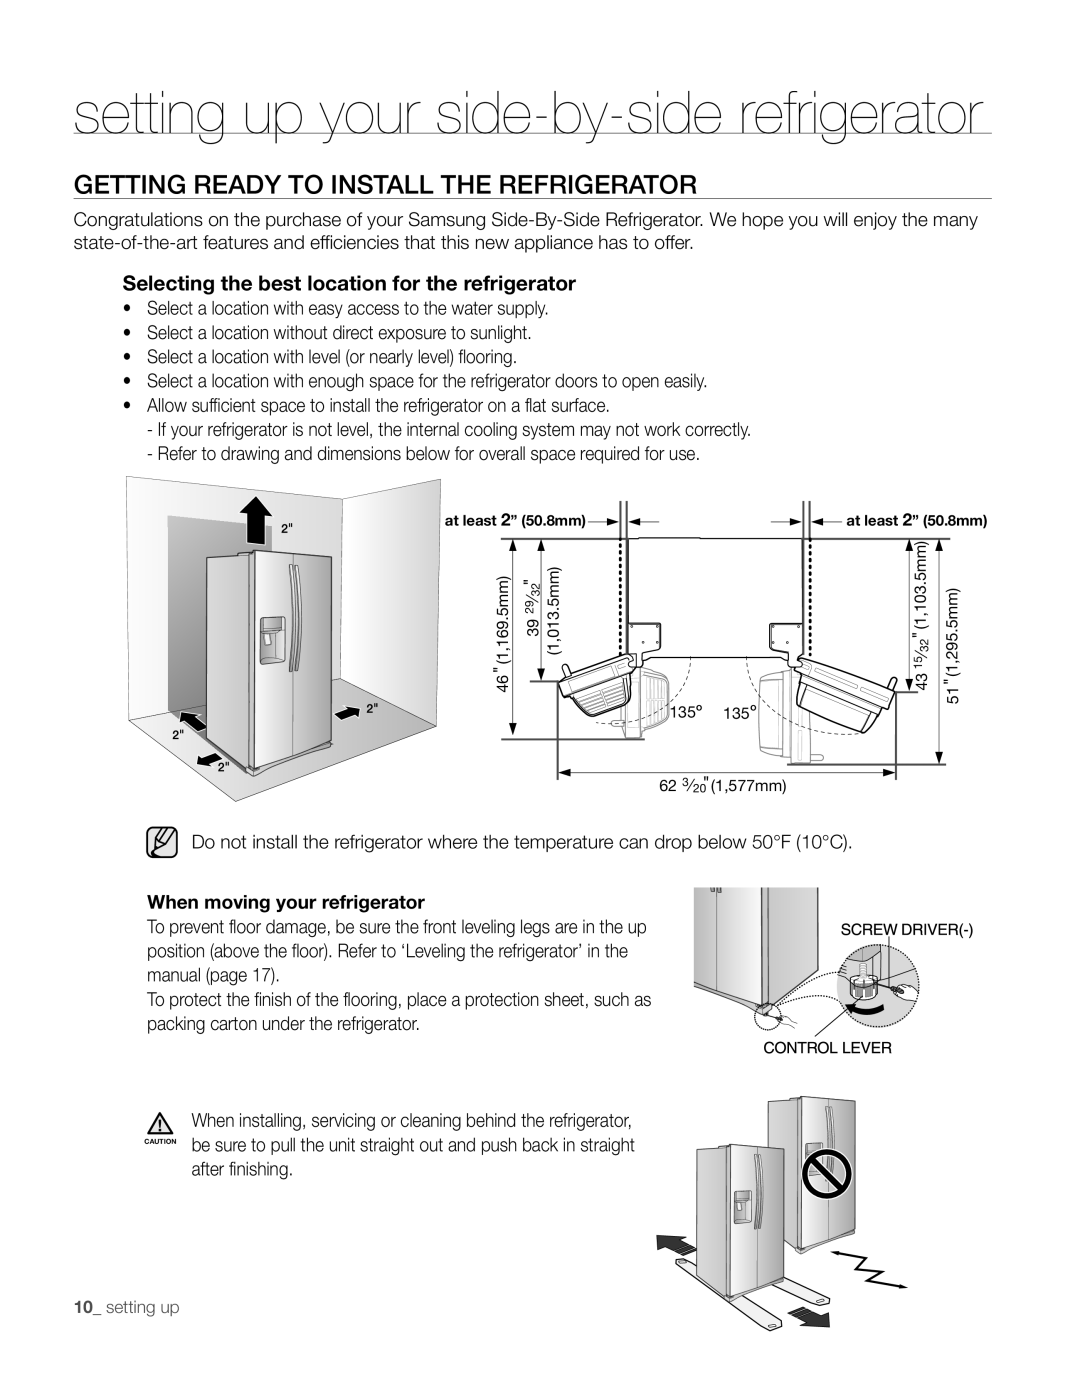 Samsung RS267TDPN user manual setting up your side-by-side refrigerator, Getting Ready To Install The Refrigerator 